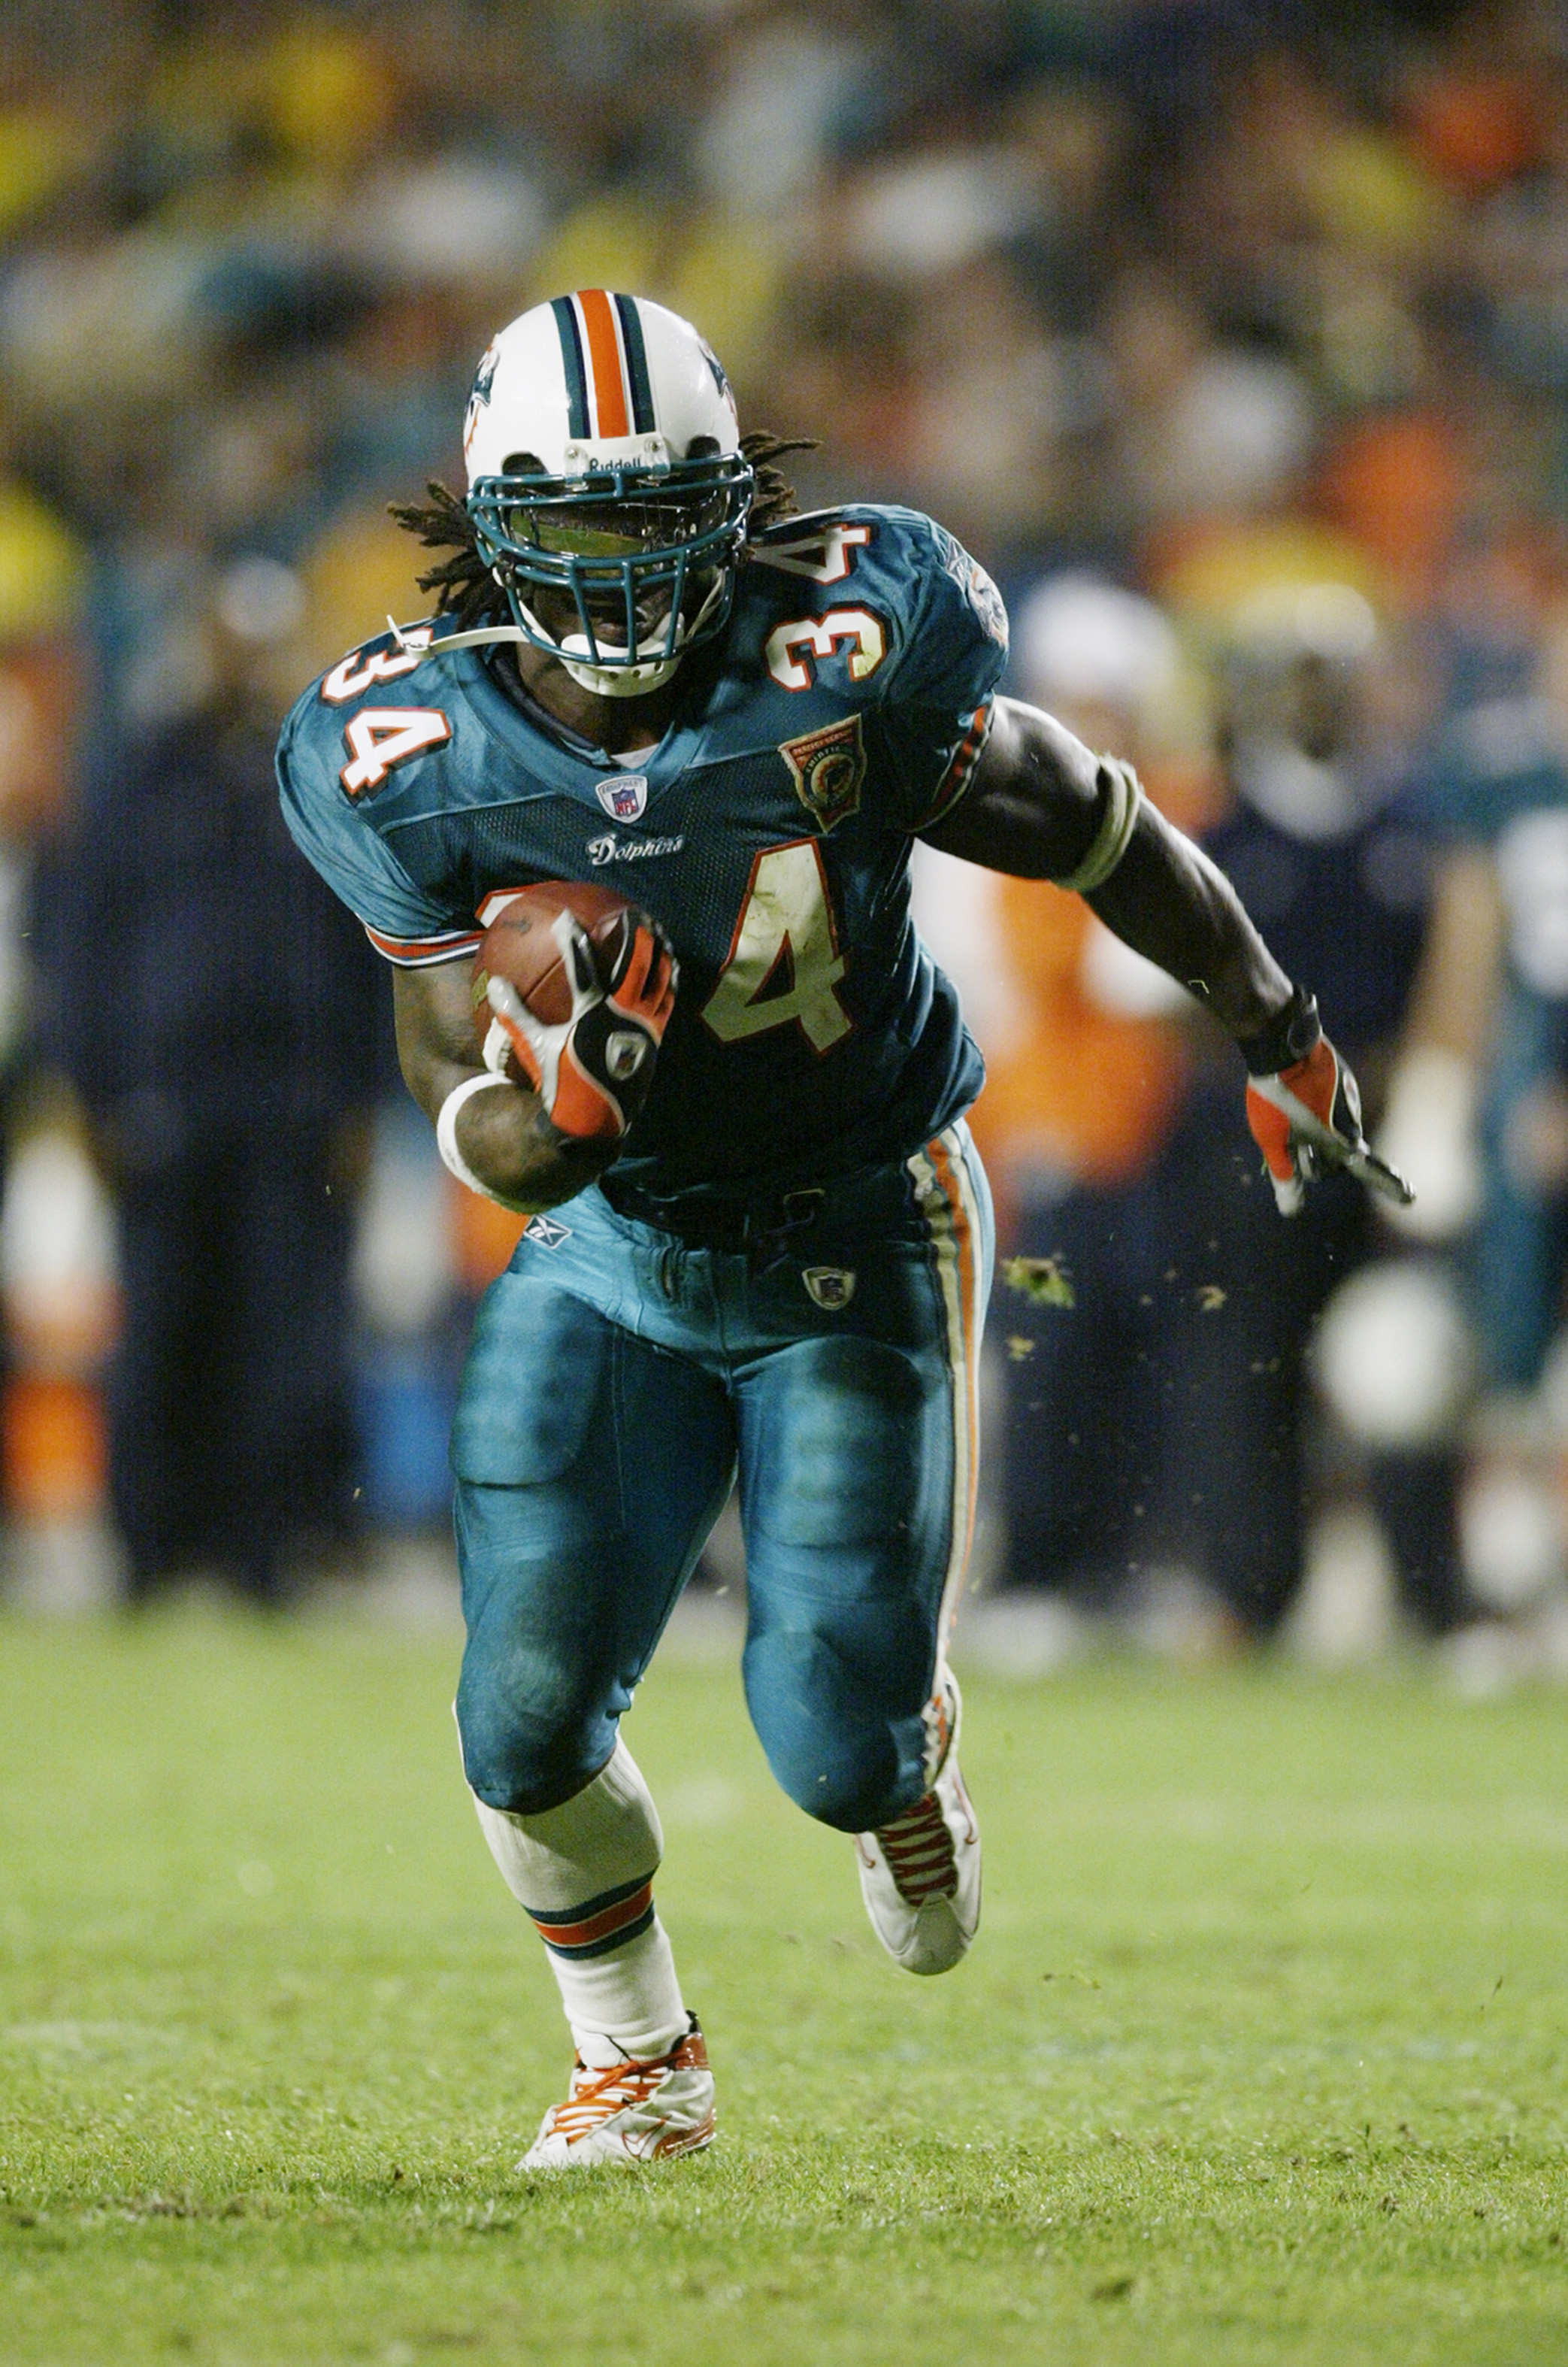 MIAMI, FL - DECEMBER 9:  Running back Ricky Williams #34 of the Miami Dolphins runs against the Chicago Bears during the game at Pro Player Stadium on December 9, 2002 in Miami, Florida. The Dolphins defeated the Bears 27-9. (Photo by Jed Jacobsohn/Getty